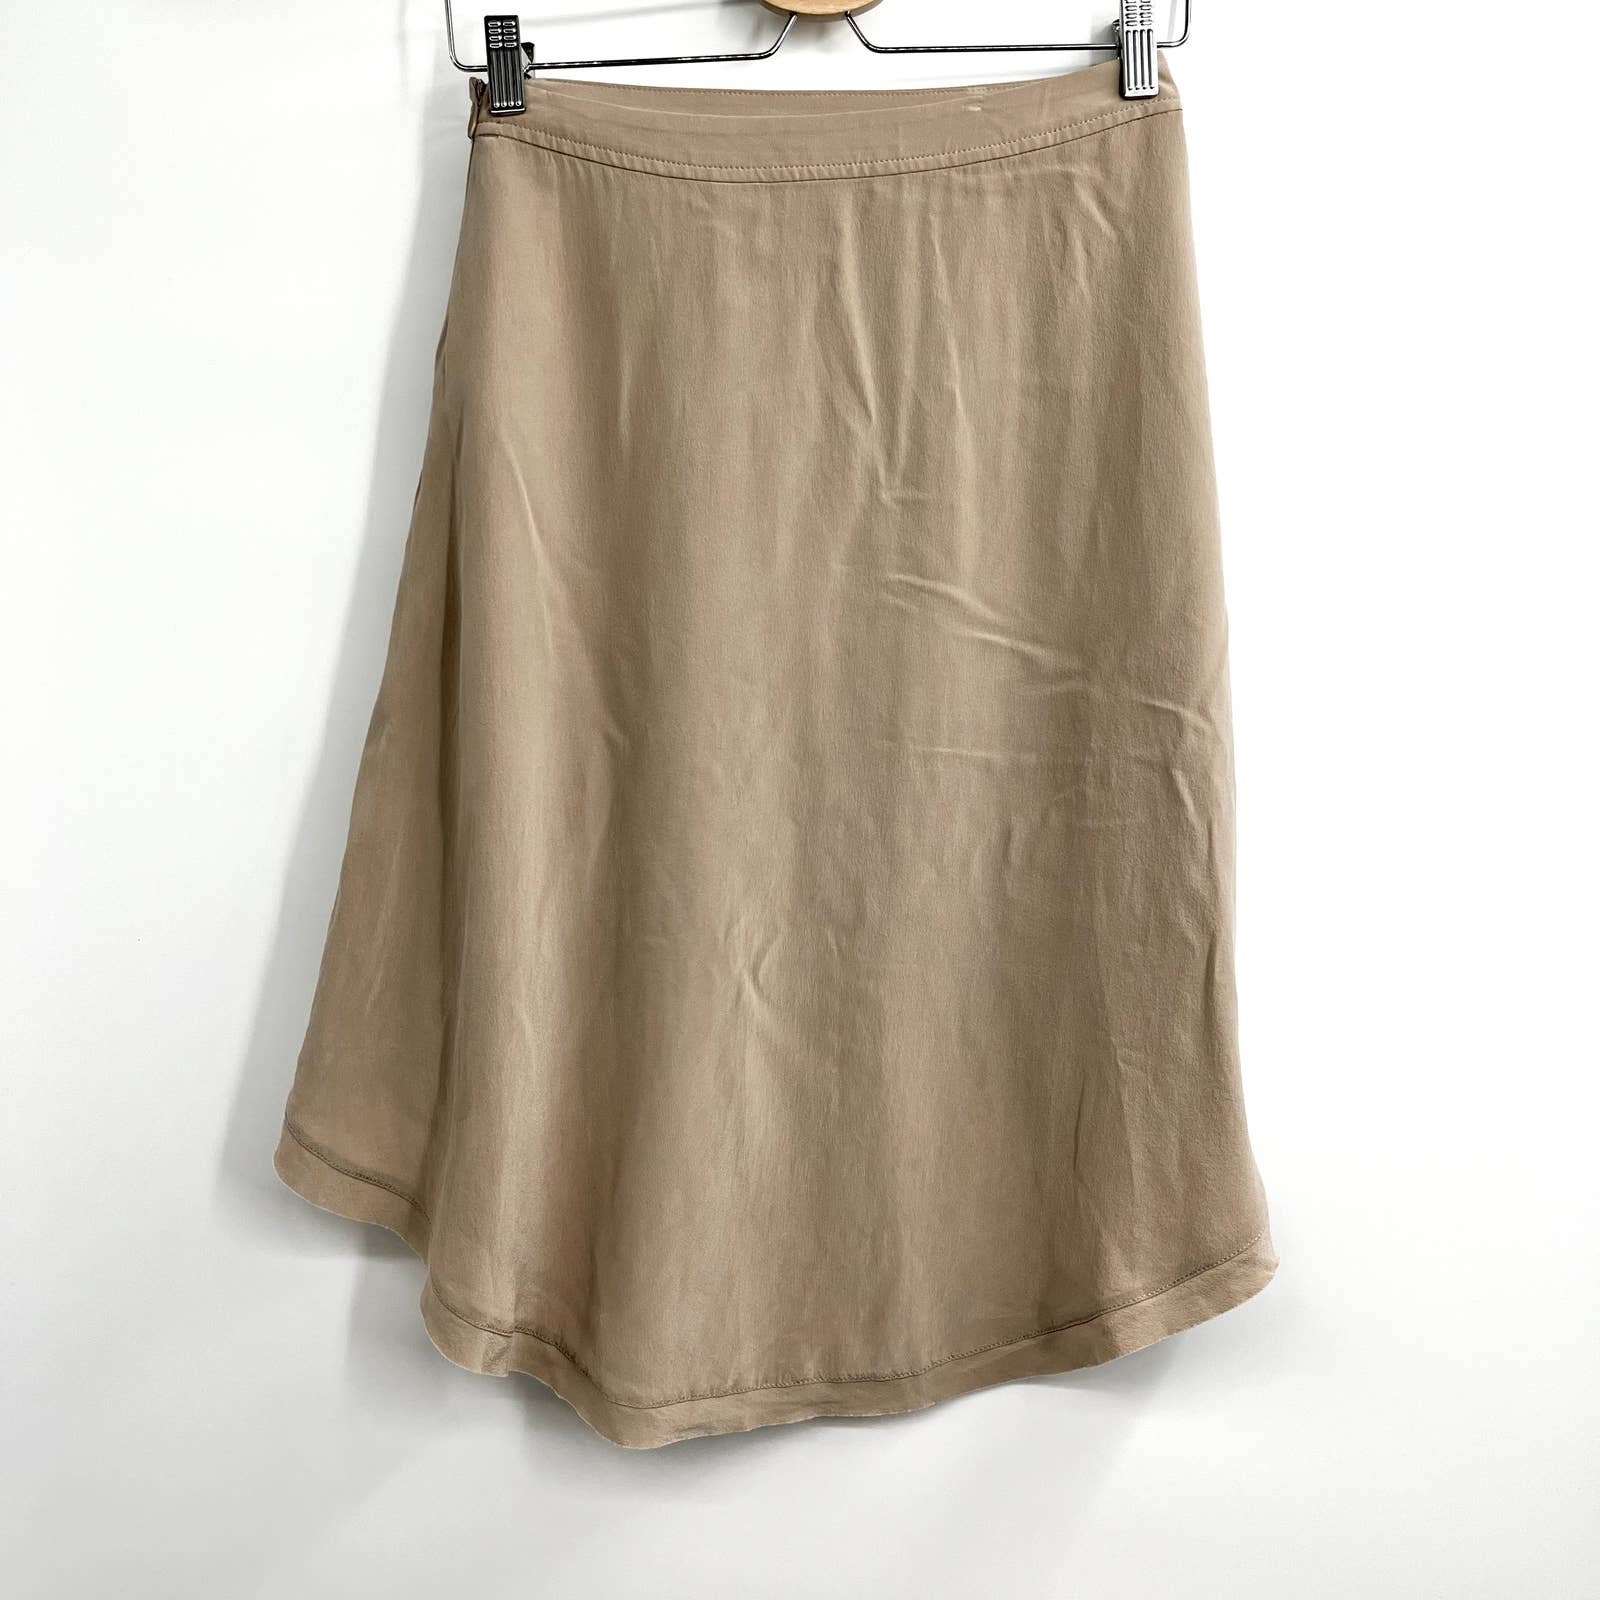 cheapest place to buy  Armani Exchange Mulberry Silk Skirt Tan Taupe Brown Lightweight Skirt High Low mWs0cWS0X best sale